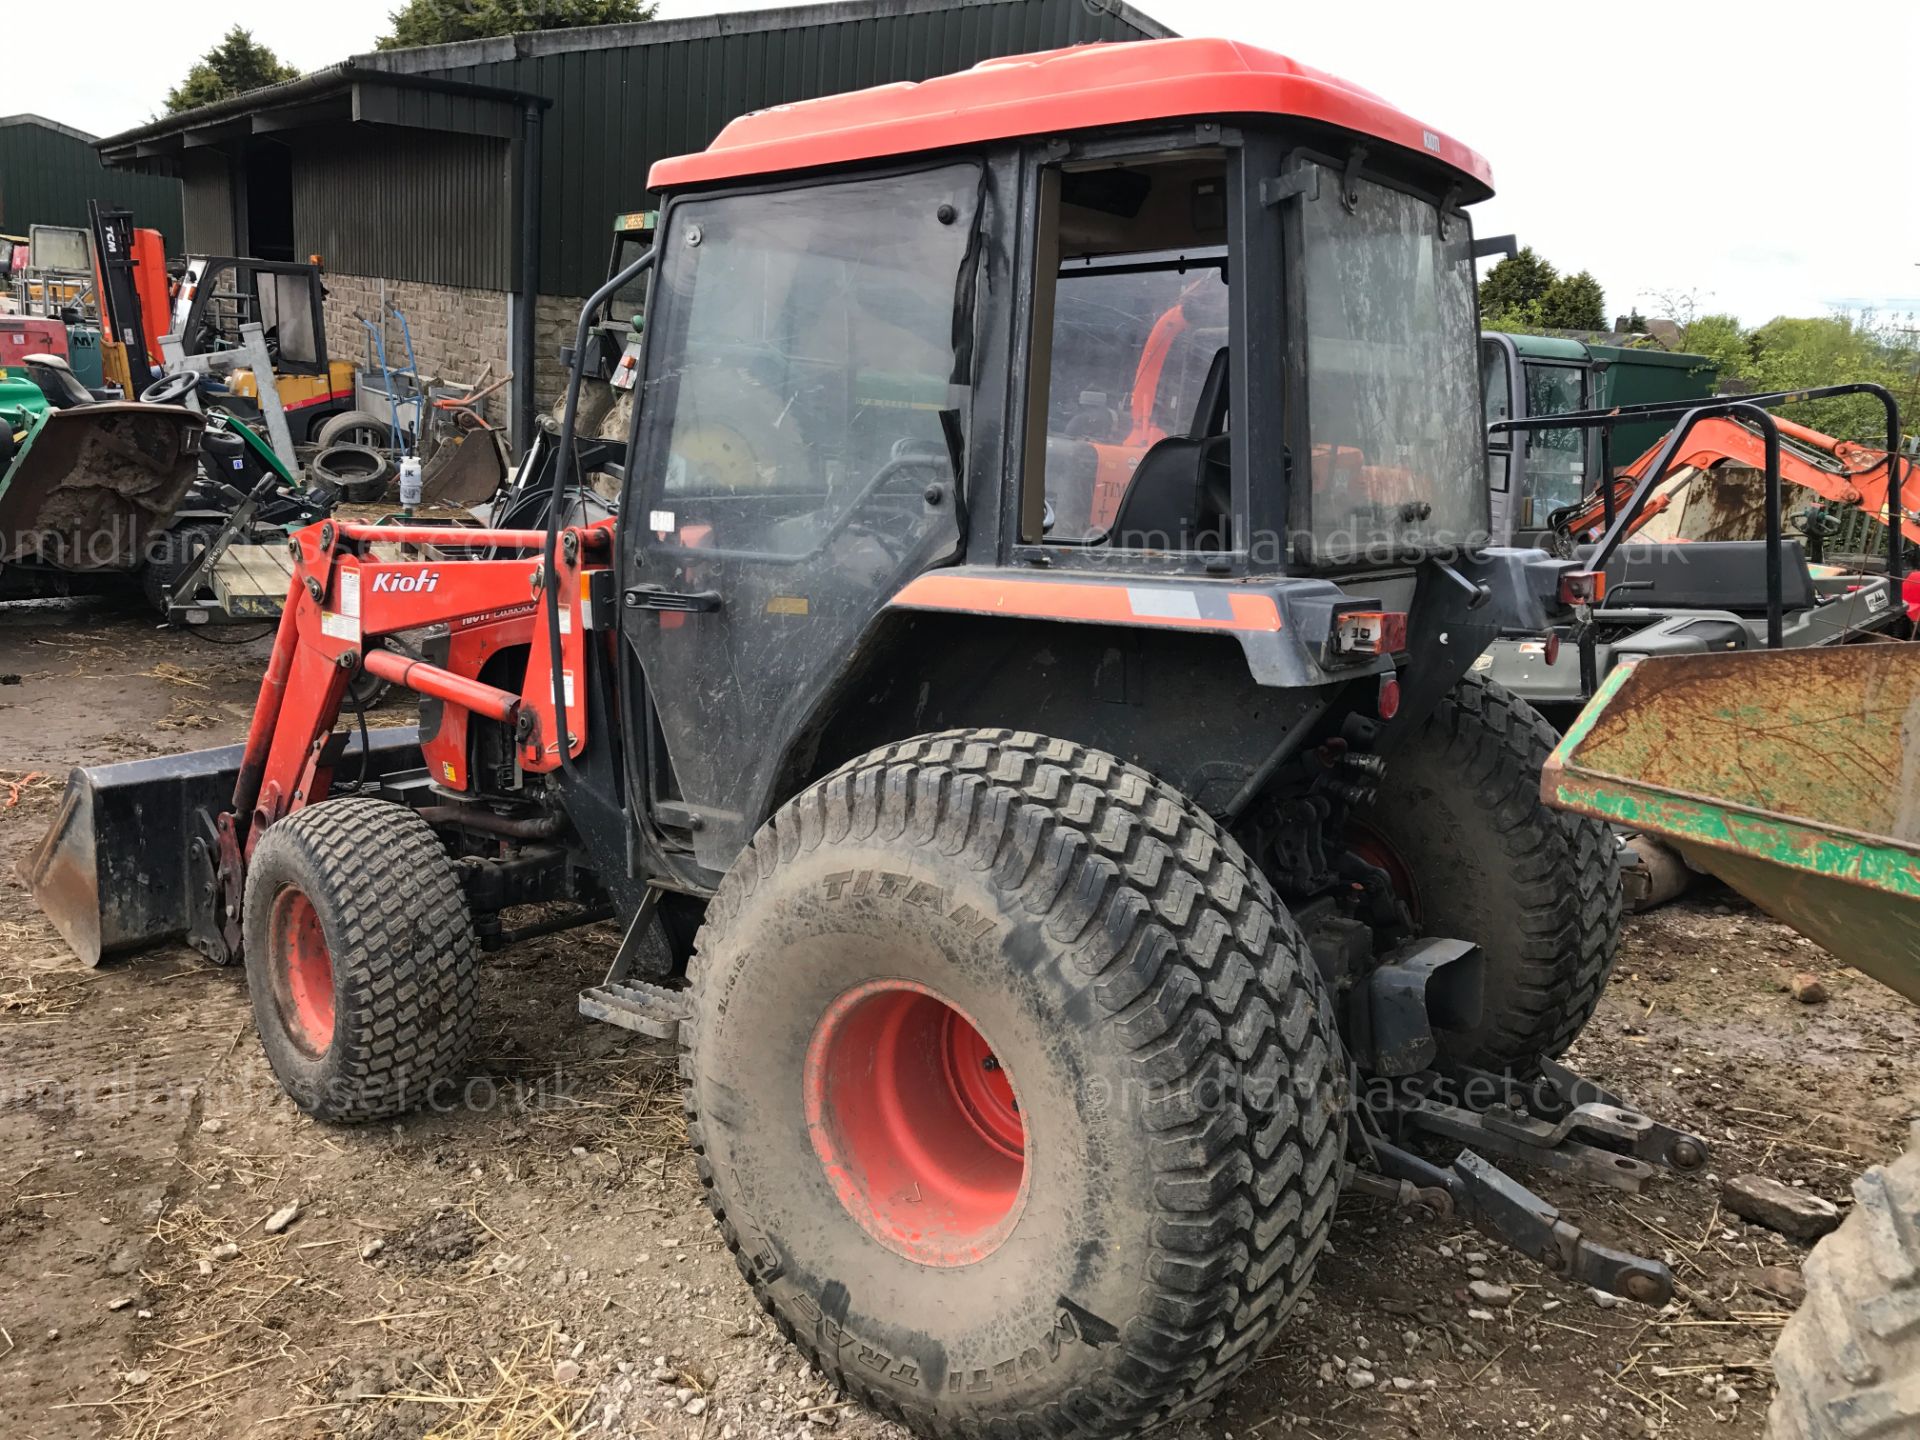 KIOTI 25 BHP TRACTOR   YEAR UNKNOWN FRONT LOADER 25 BHP GOOD WORKING ORDER SHOWING 4,963 HOURS (UN- - Image 8 of 10